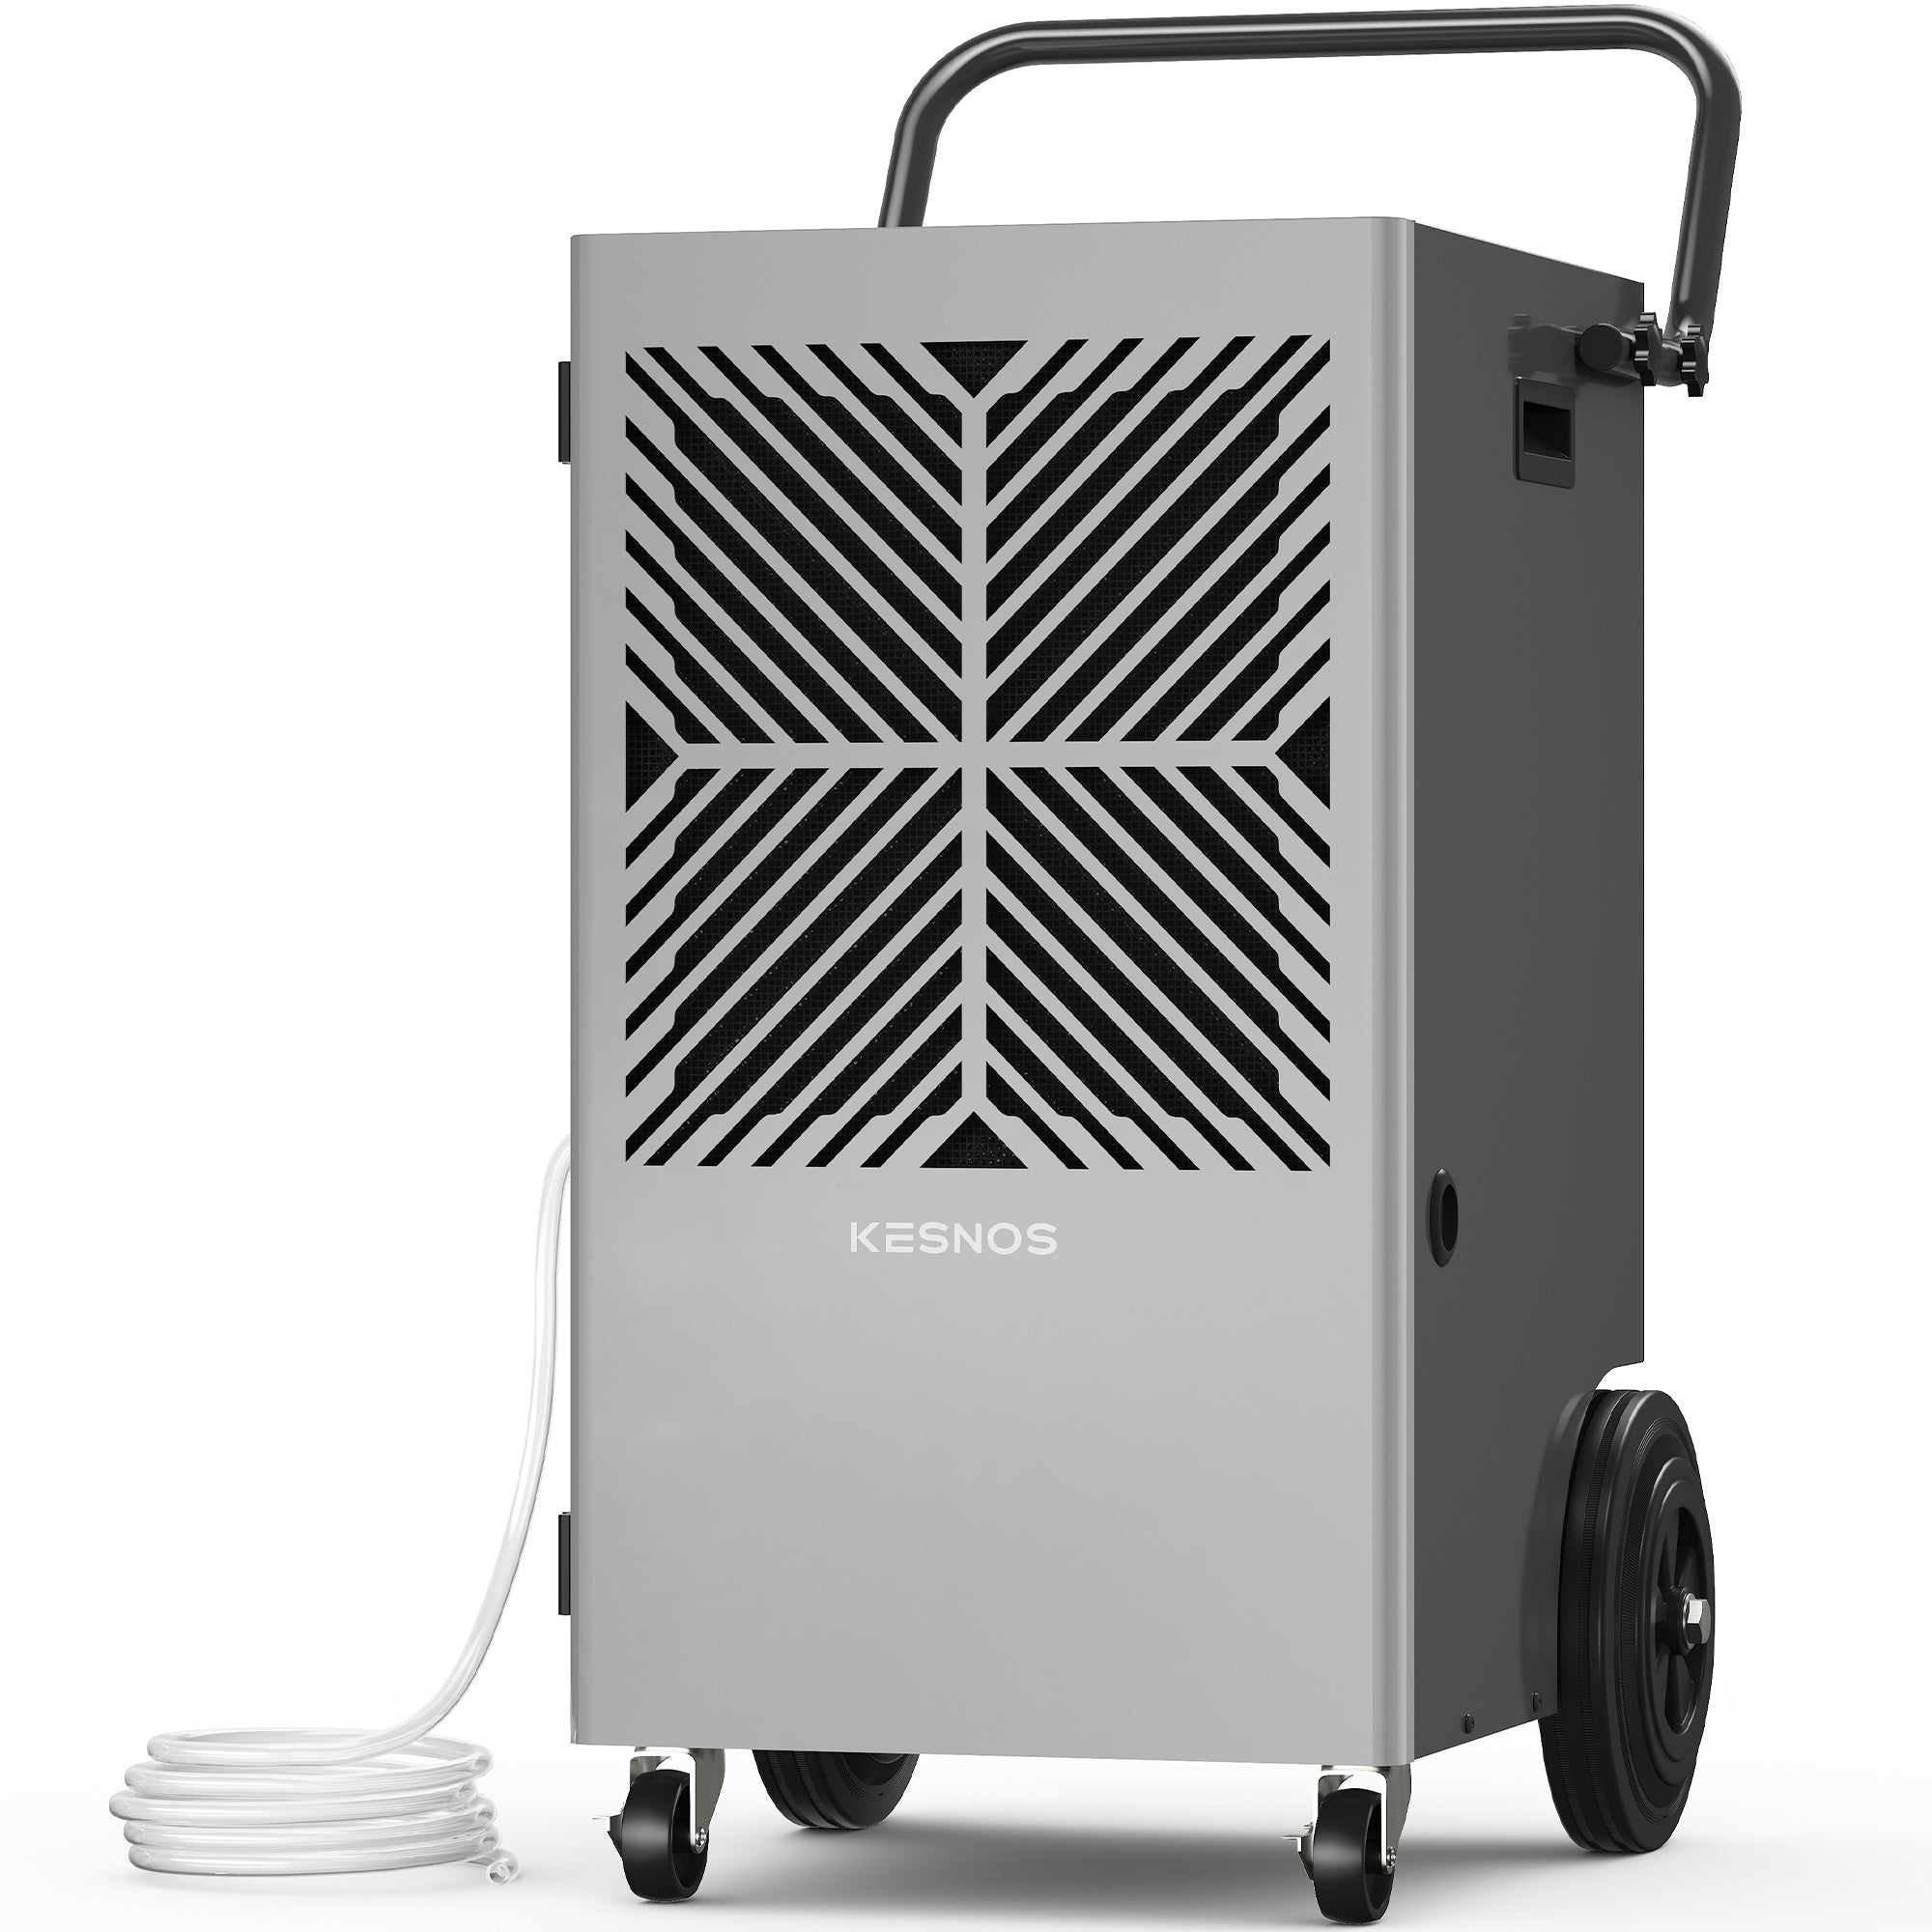 Kesnos 155 Pints Commercial Dehumidifier with Pump – Dehumidifier with Drain Hose and 24 Hr Timer in Large Space Up to 7500 Sq. Ft. – Ideal for Basements, Industrial Spaces and Job Sites (Model: DP602A)